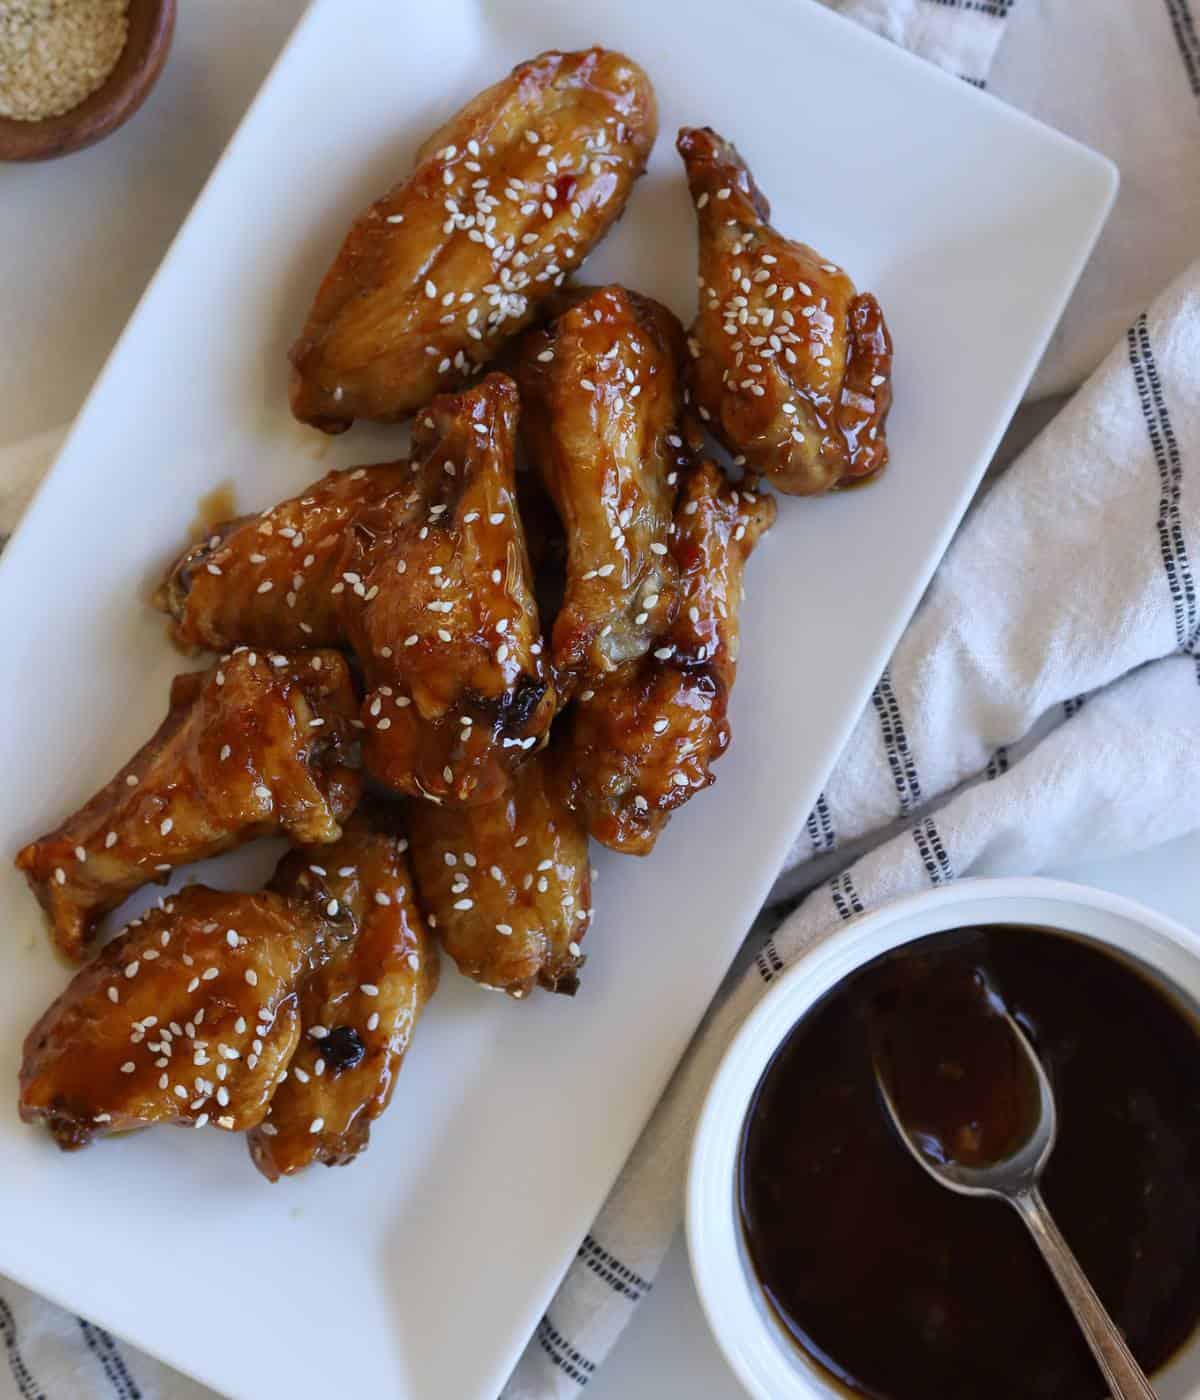 Garlic soy chicken wings on plate with side of garlic soy sauce.